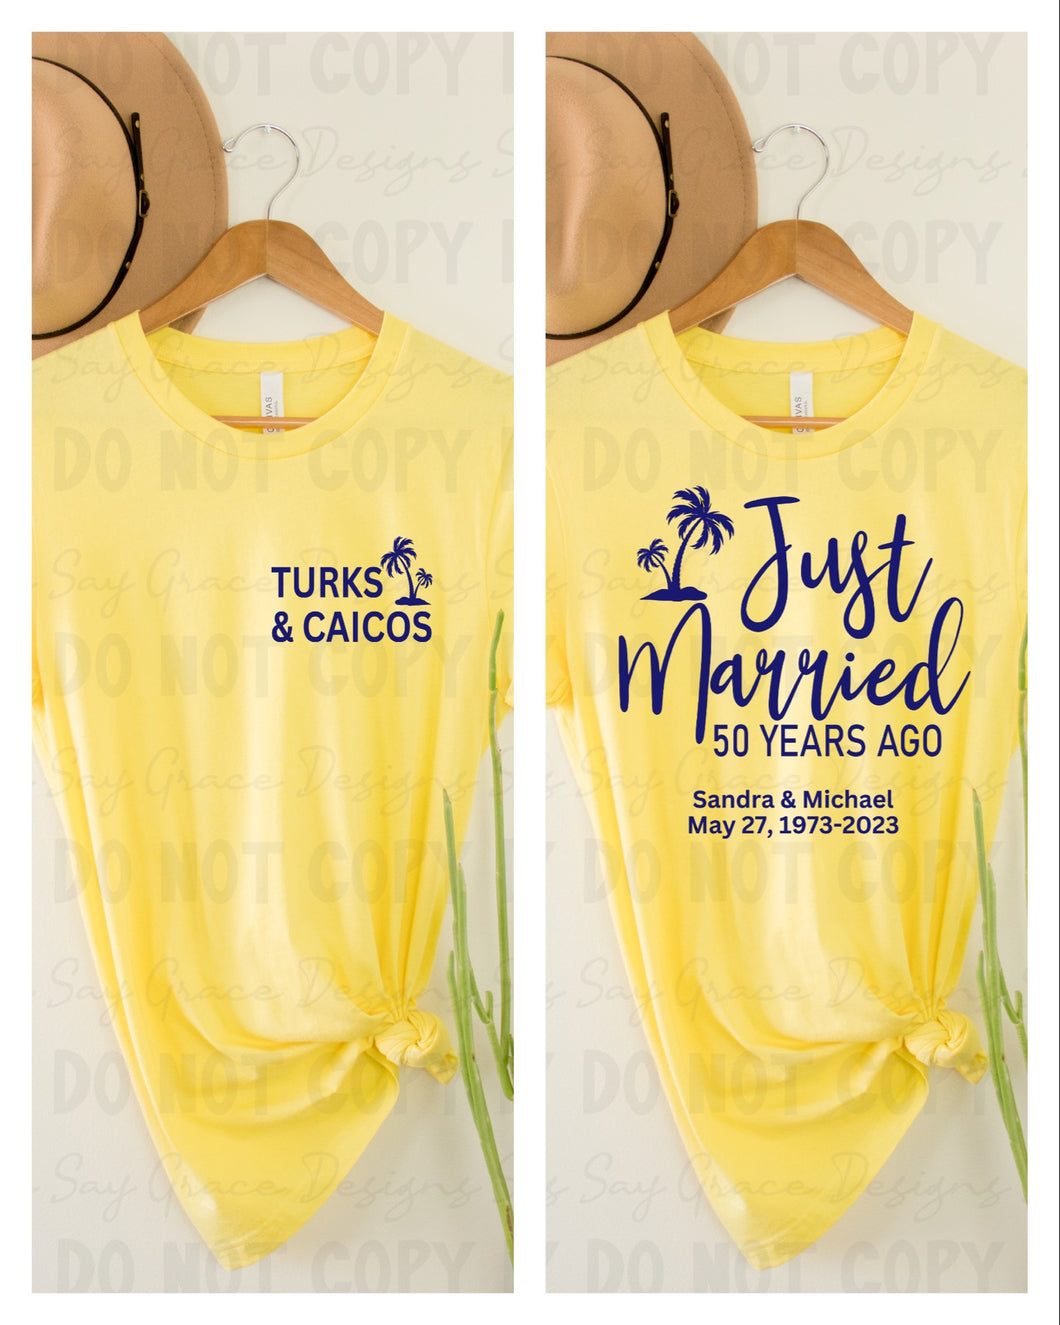 Just Married - Front and Back